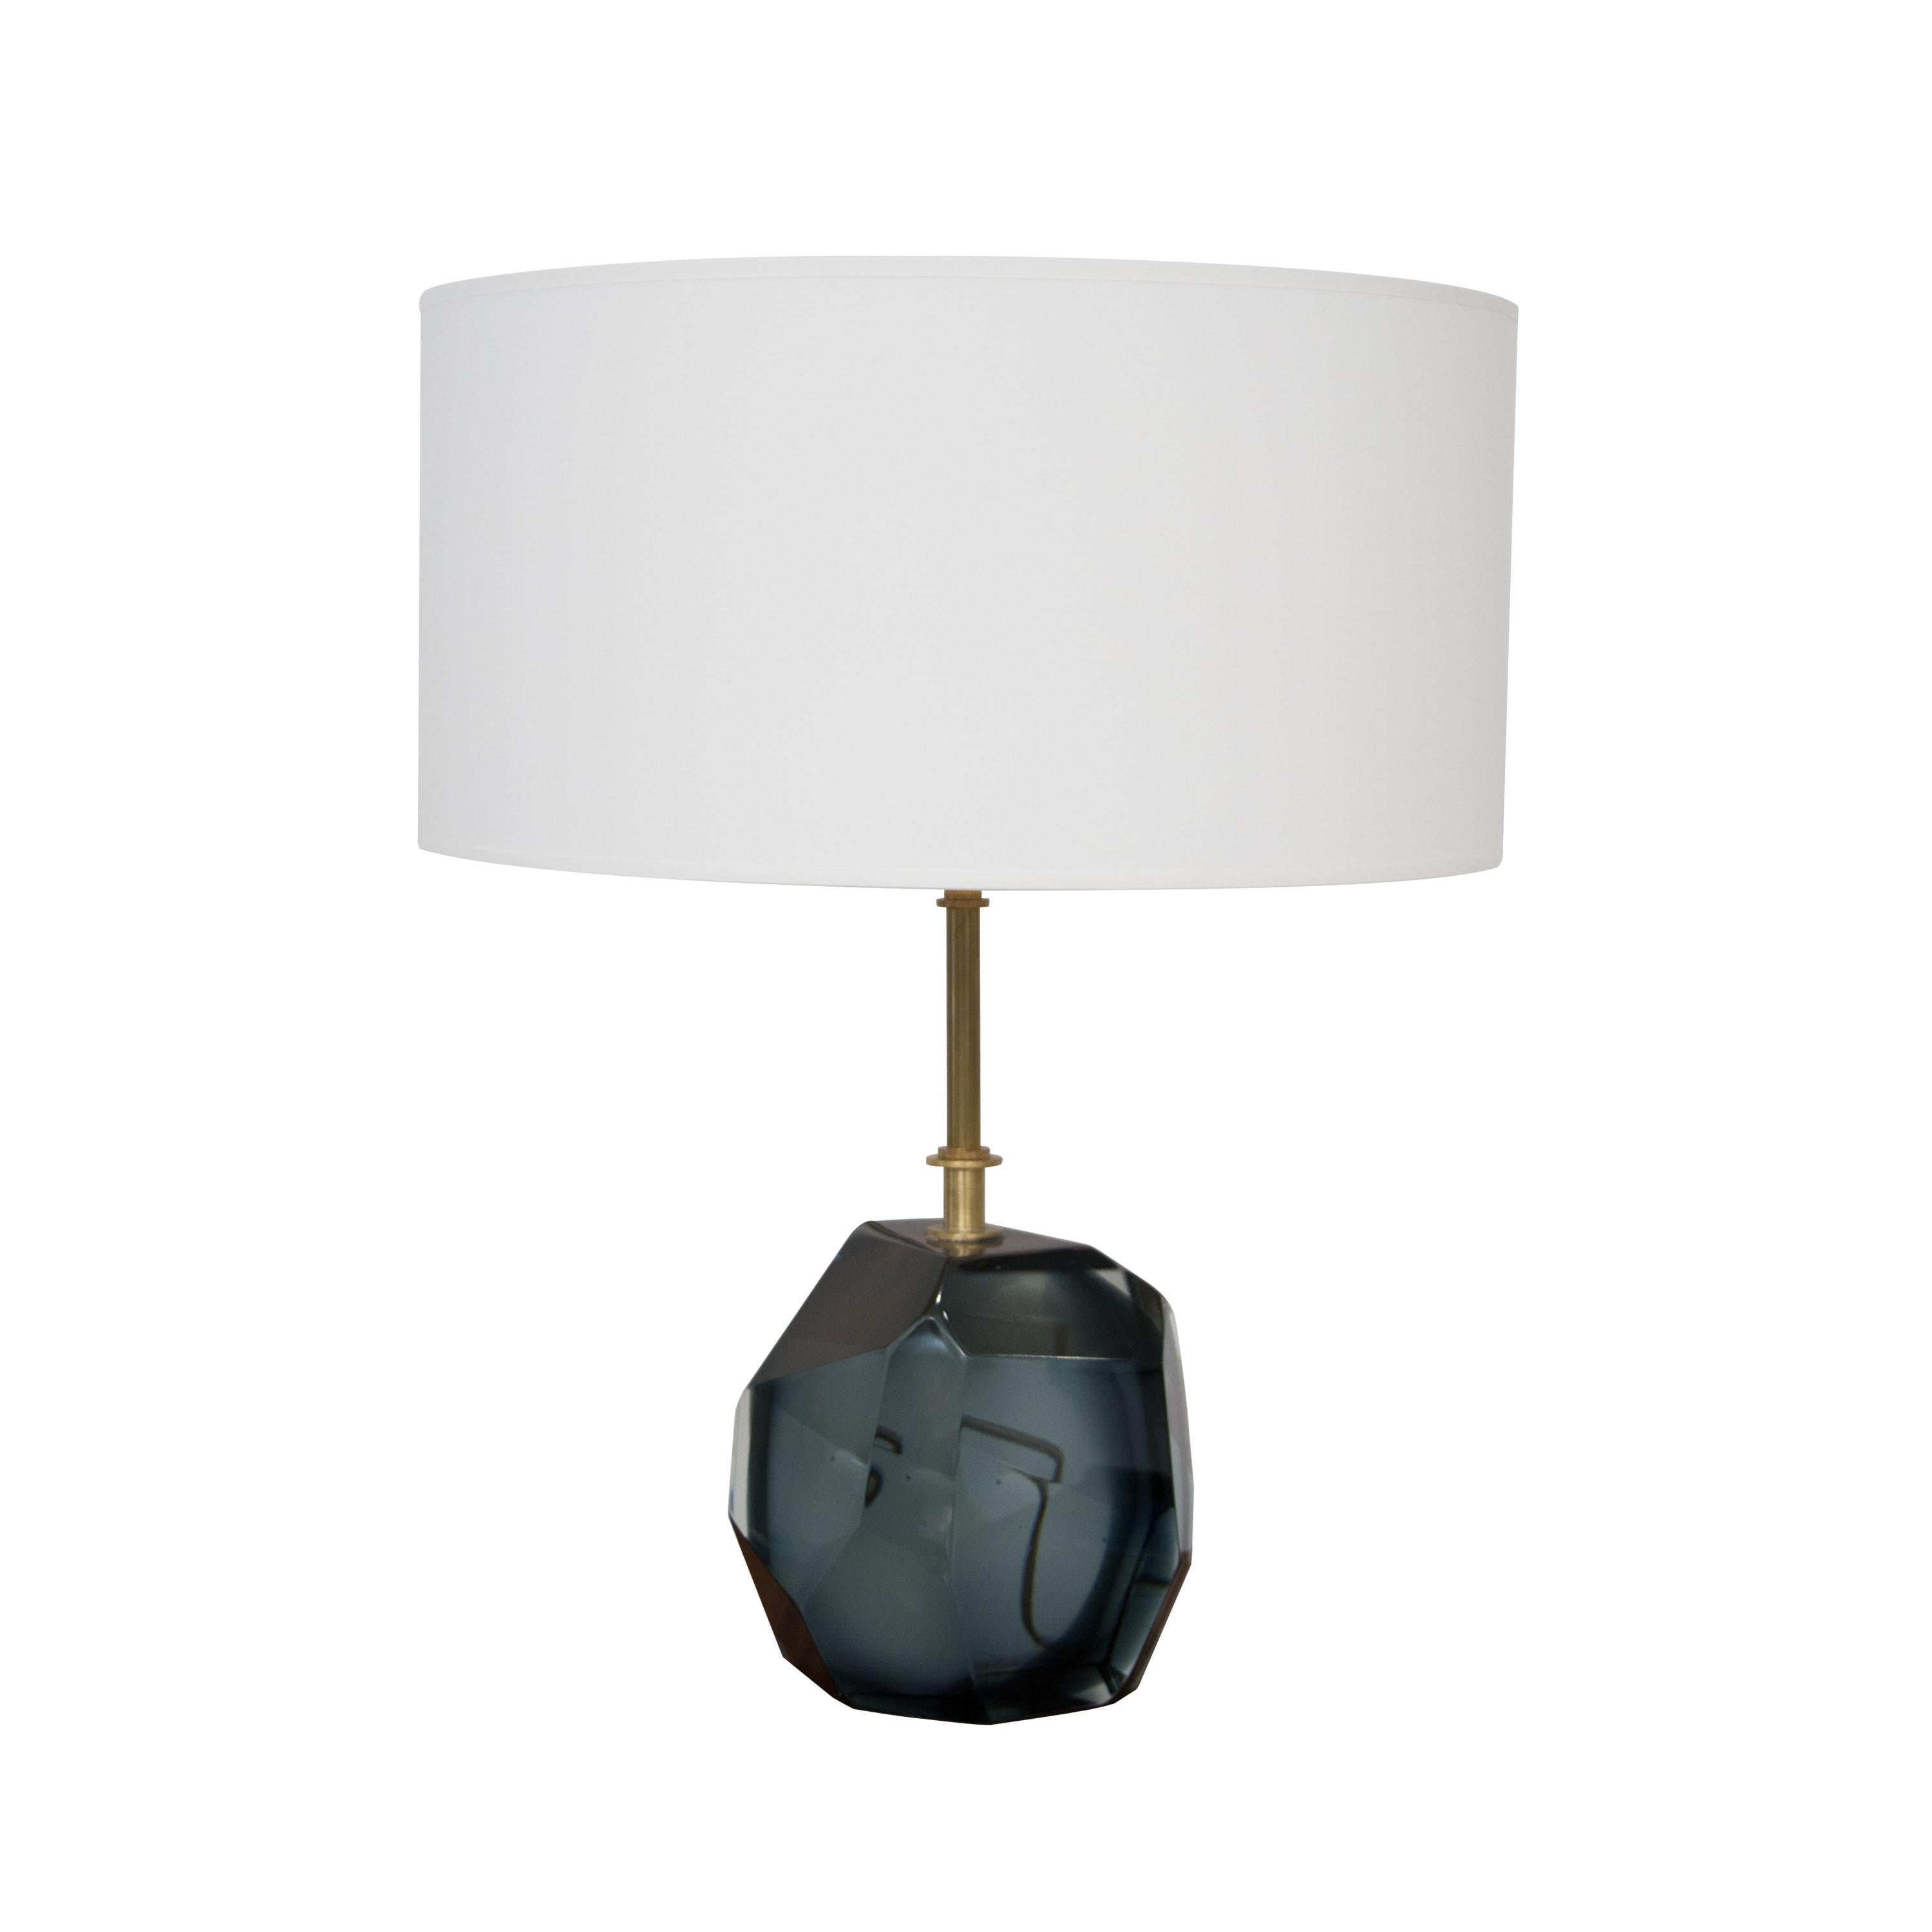 Table lamp with Murano faceted glass in translucent grey and brass stem made by hand.